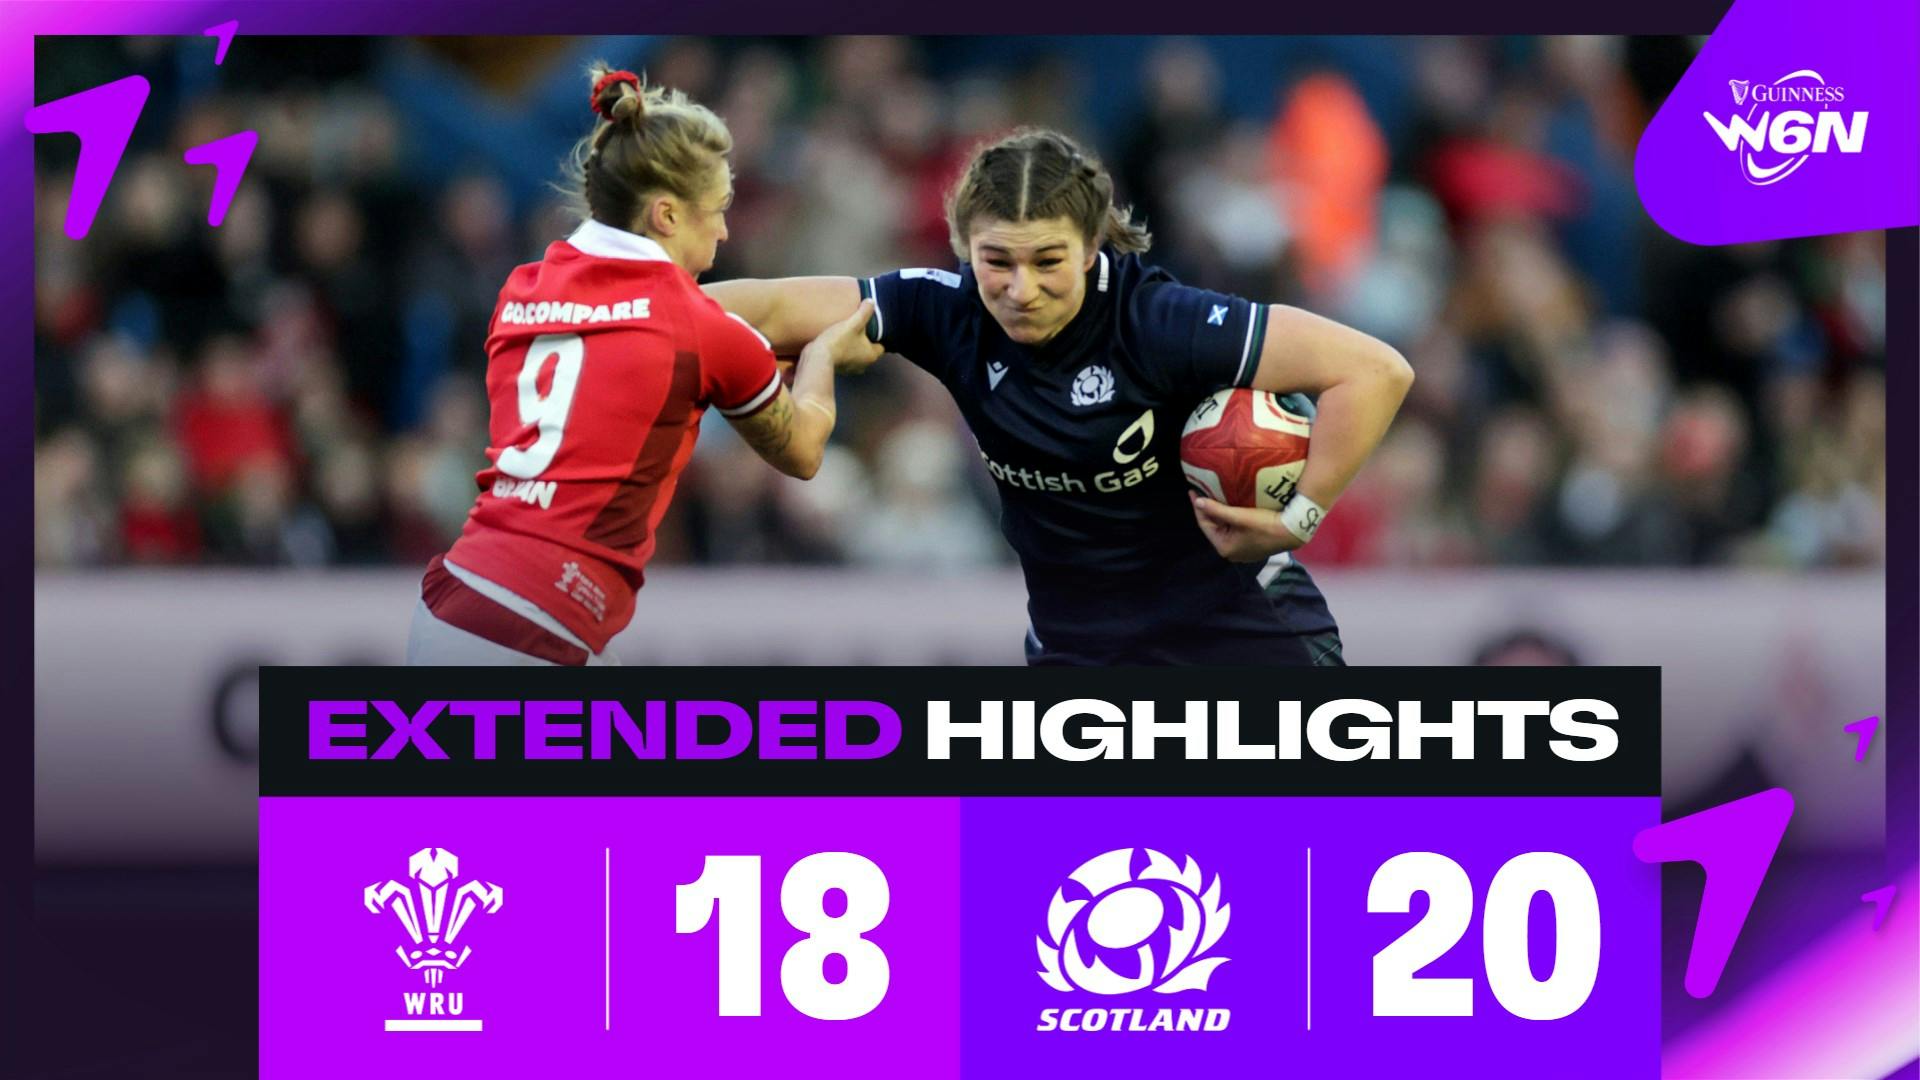 EXTENDED HIGHLIGHTS | GUINNESS WOMEN'S SIX NATIONS | WALES V SCOTLAND